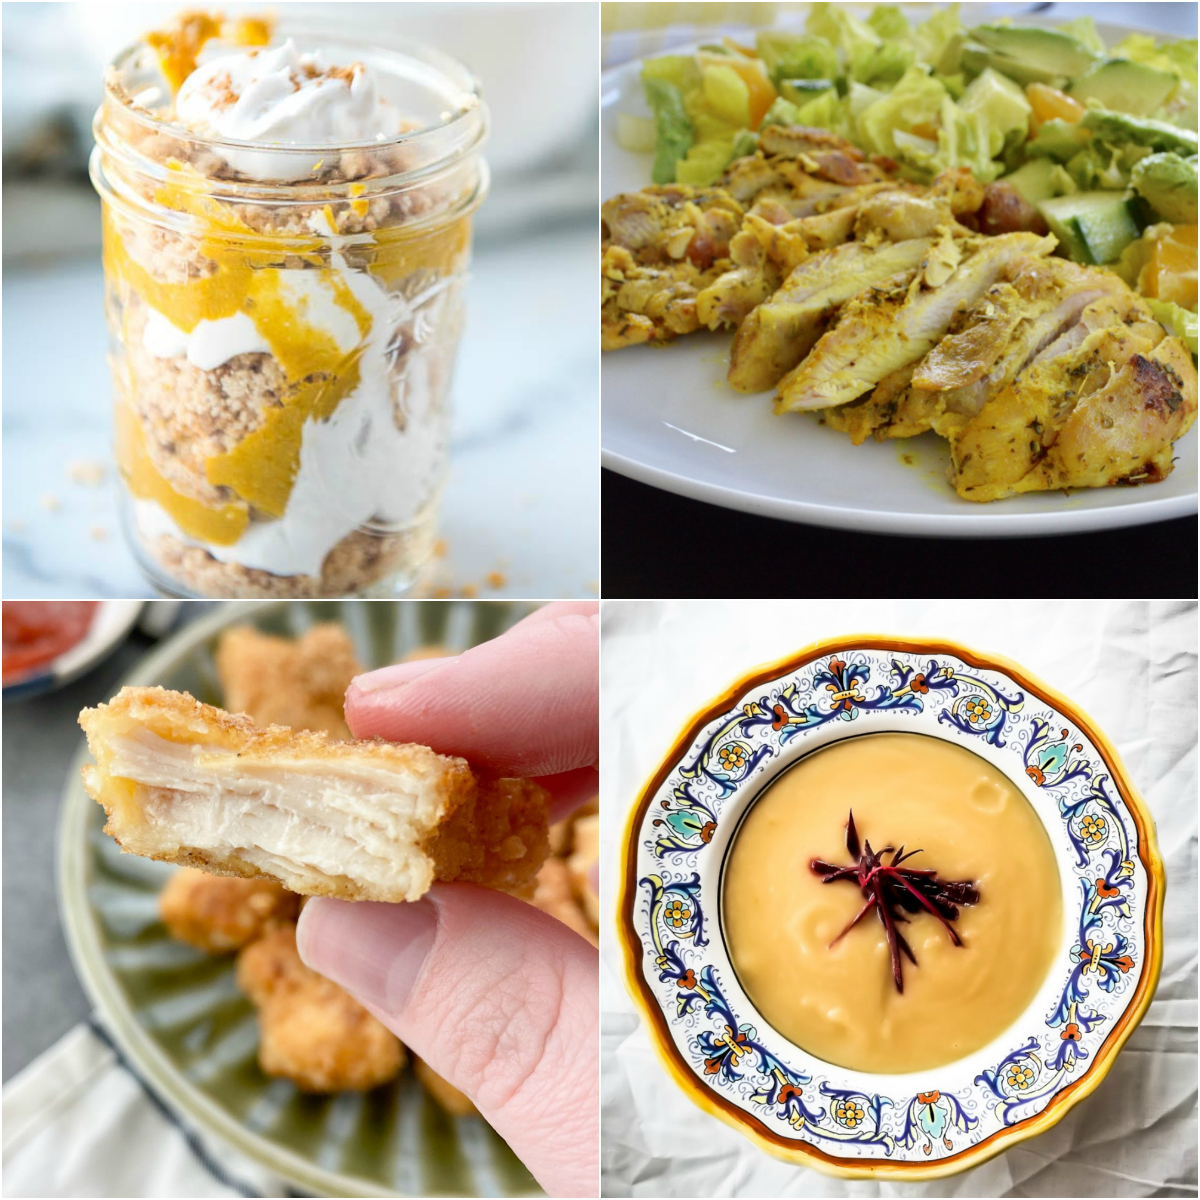 Paleo AIP Recipe Roundtable #311 | Phoenix Helix - *Featured Recipes: Pumpkin Pudding Parfaits, Golden Chicken Nuggets, Turmeric Chicken Salad with a Turmeric Citrus Dressing, and Spiced Turnip Soup